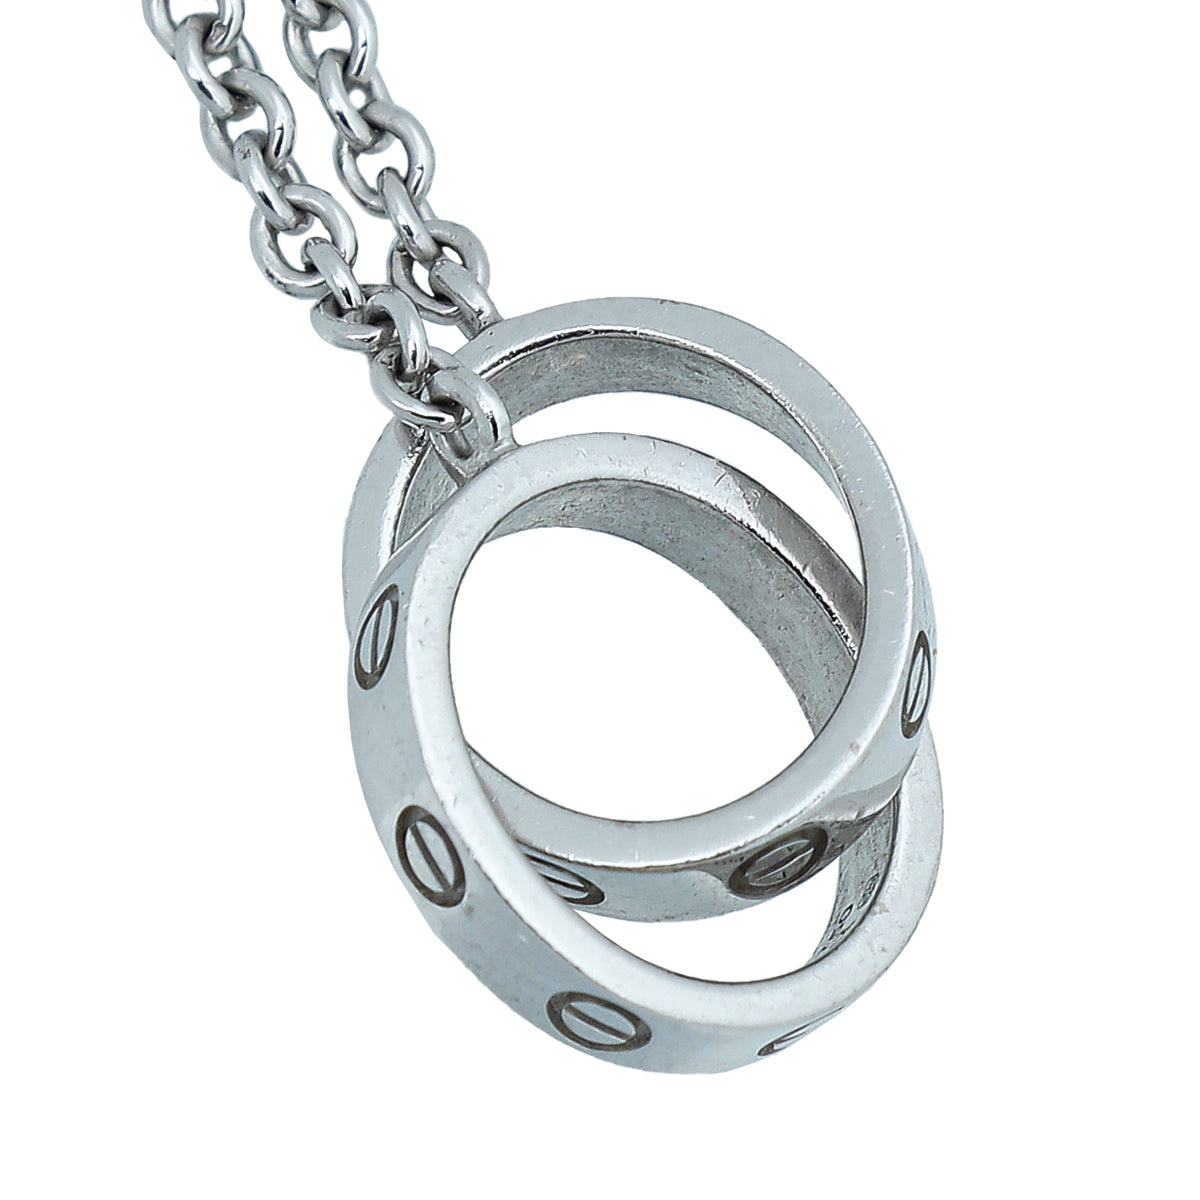 Cartier 18K White Gold Love Hoop Small Necklace